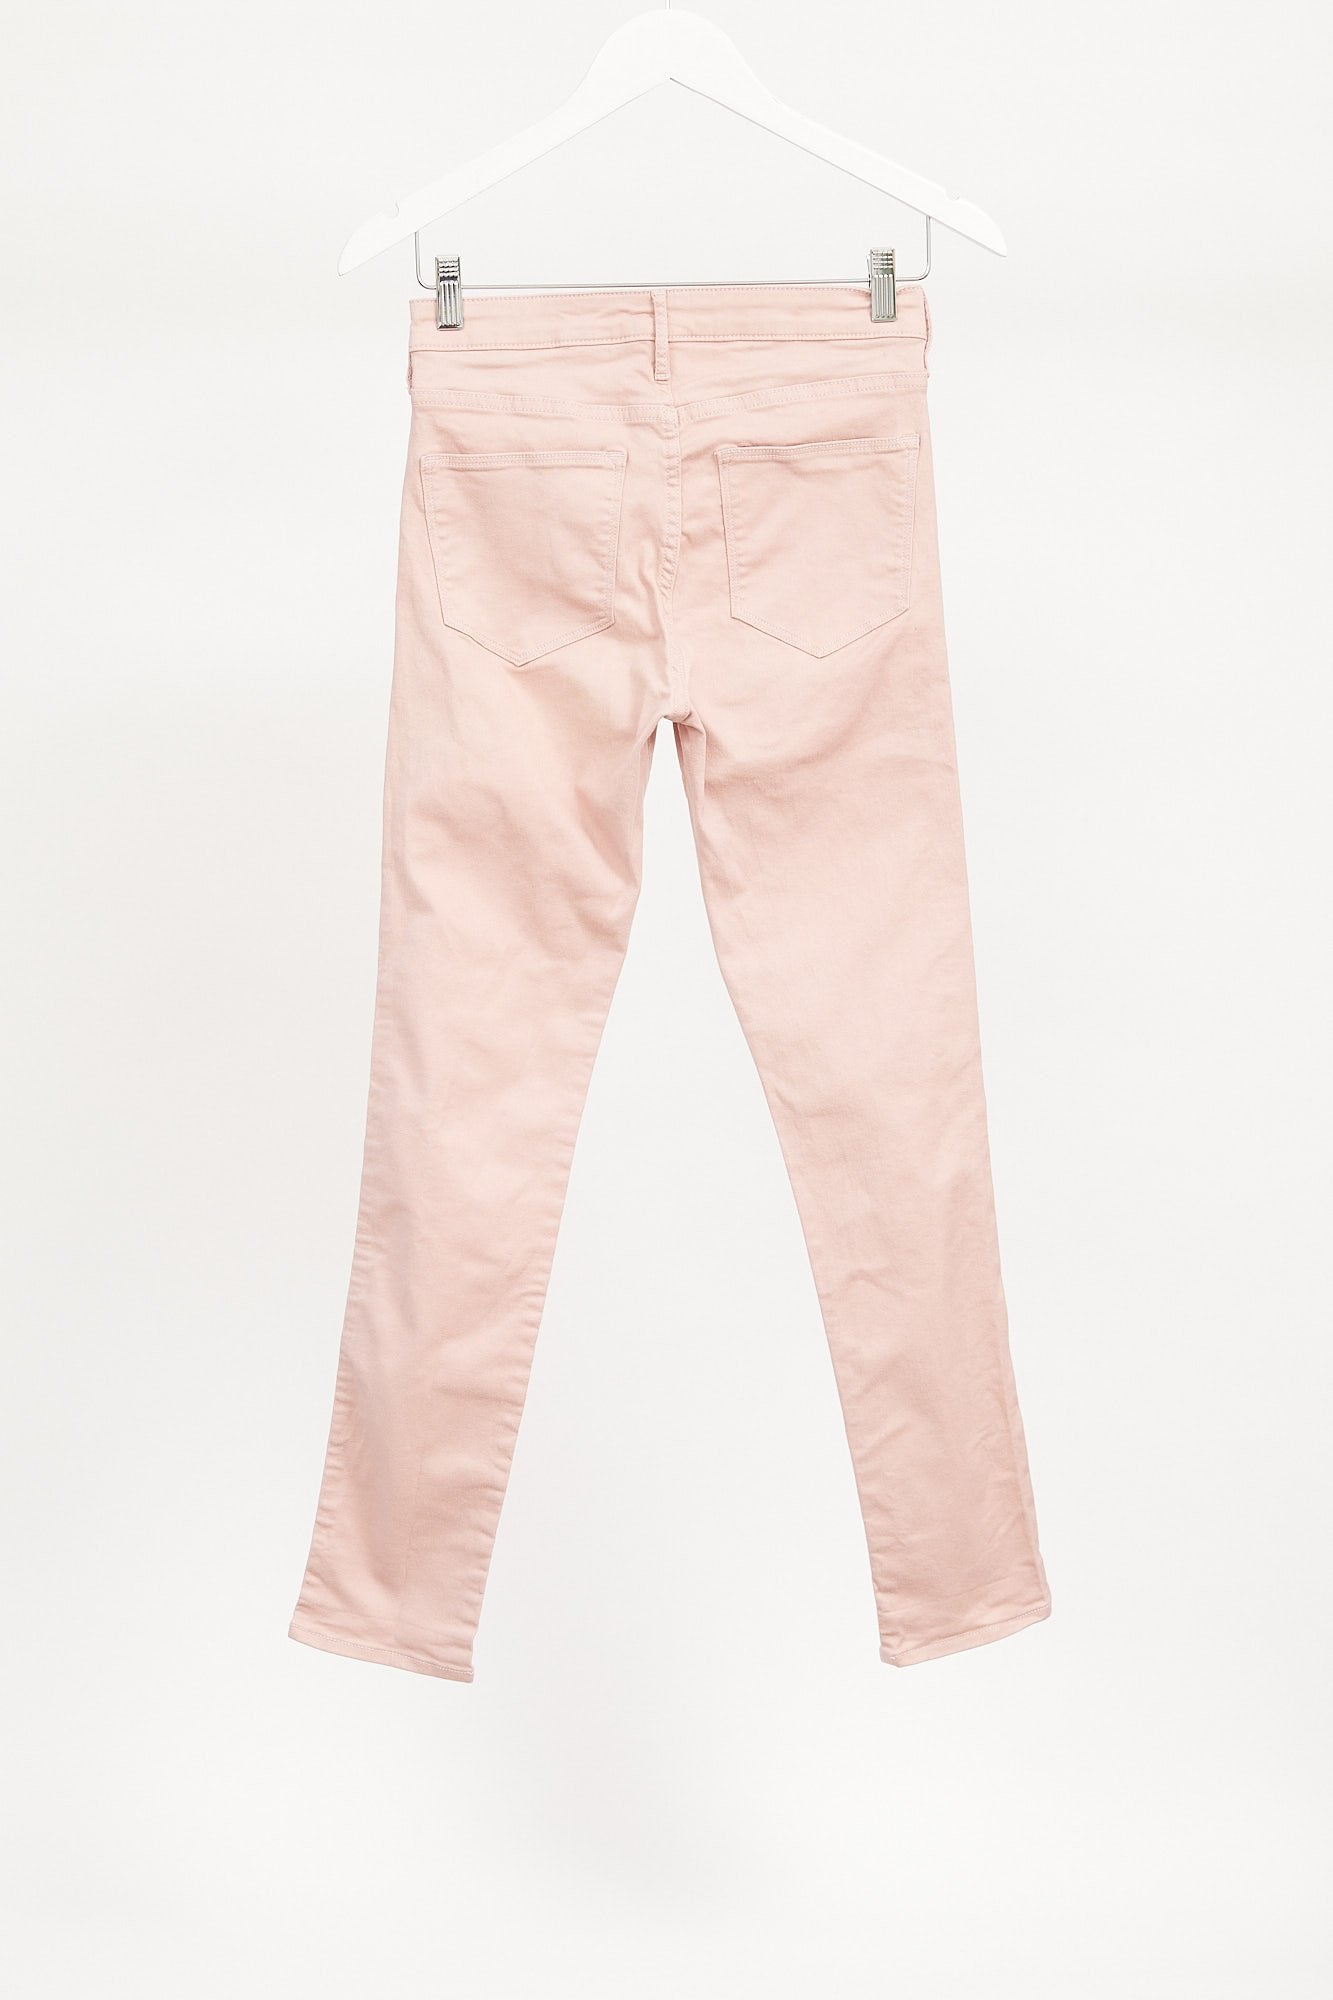 Womens Pink Jeans: Size Small